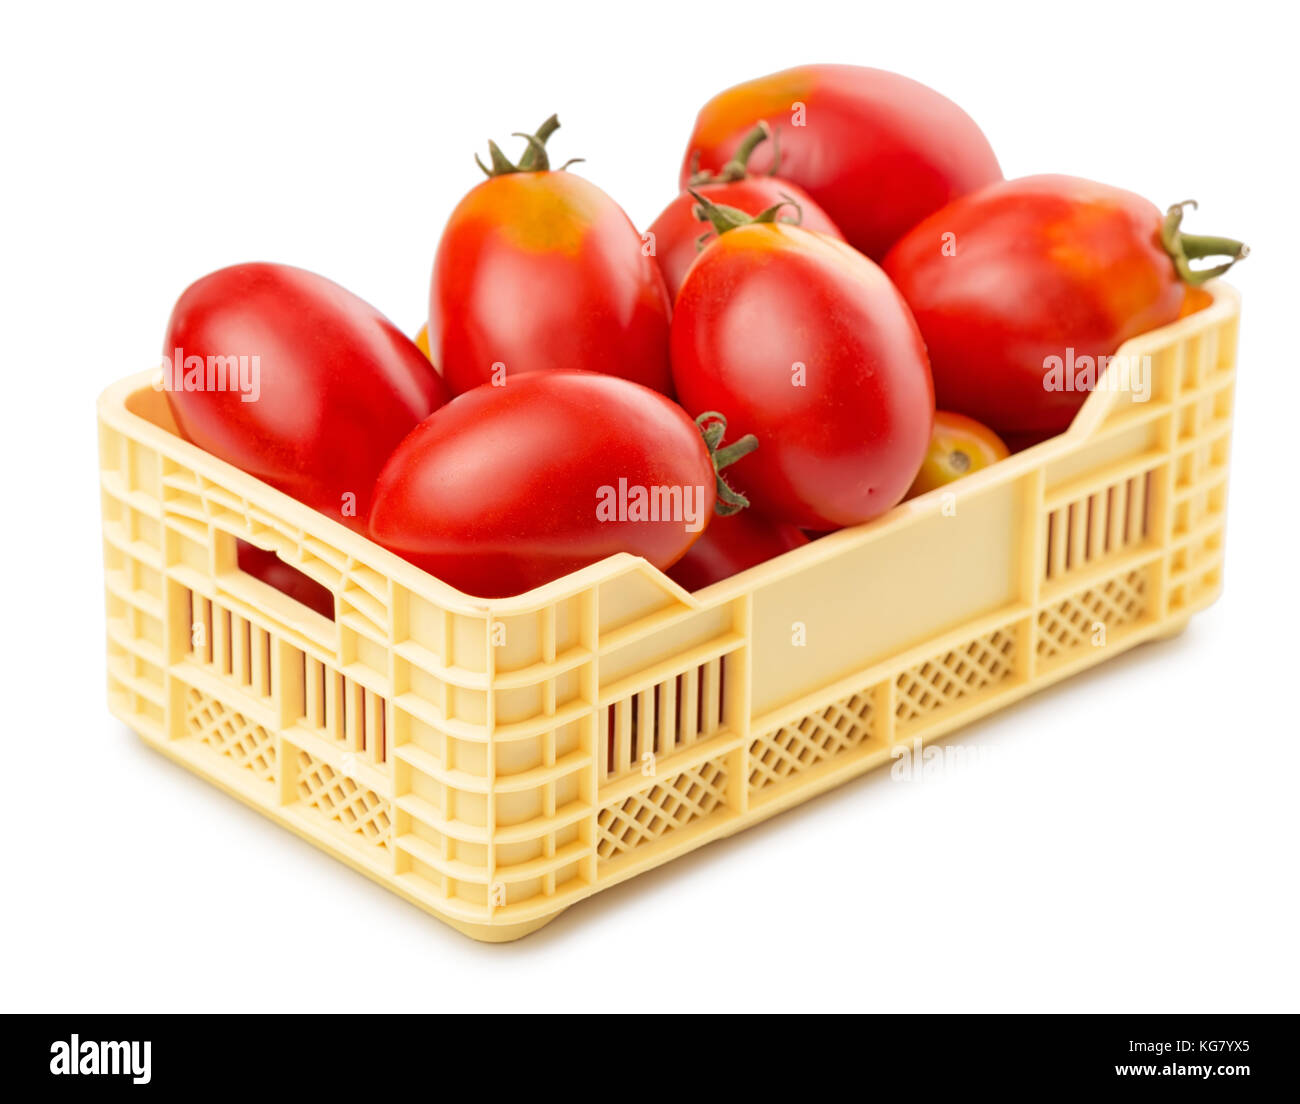 full vegetable box with tomato isolated on white background, concept raw food Stock Photo